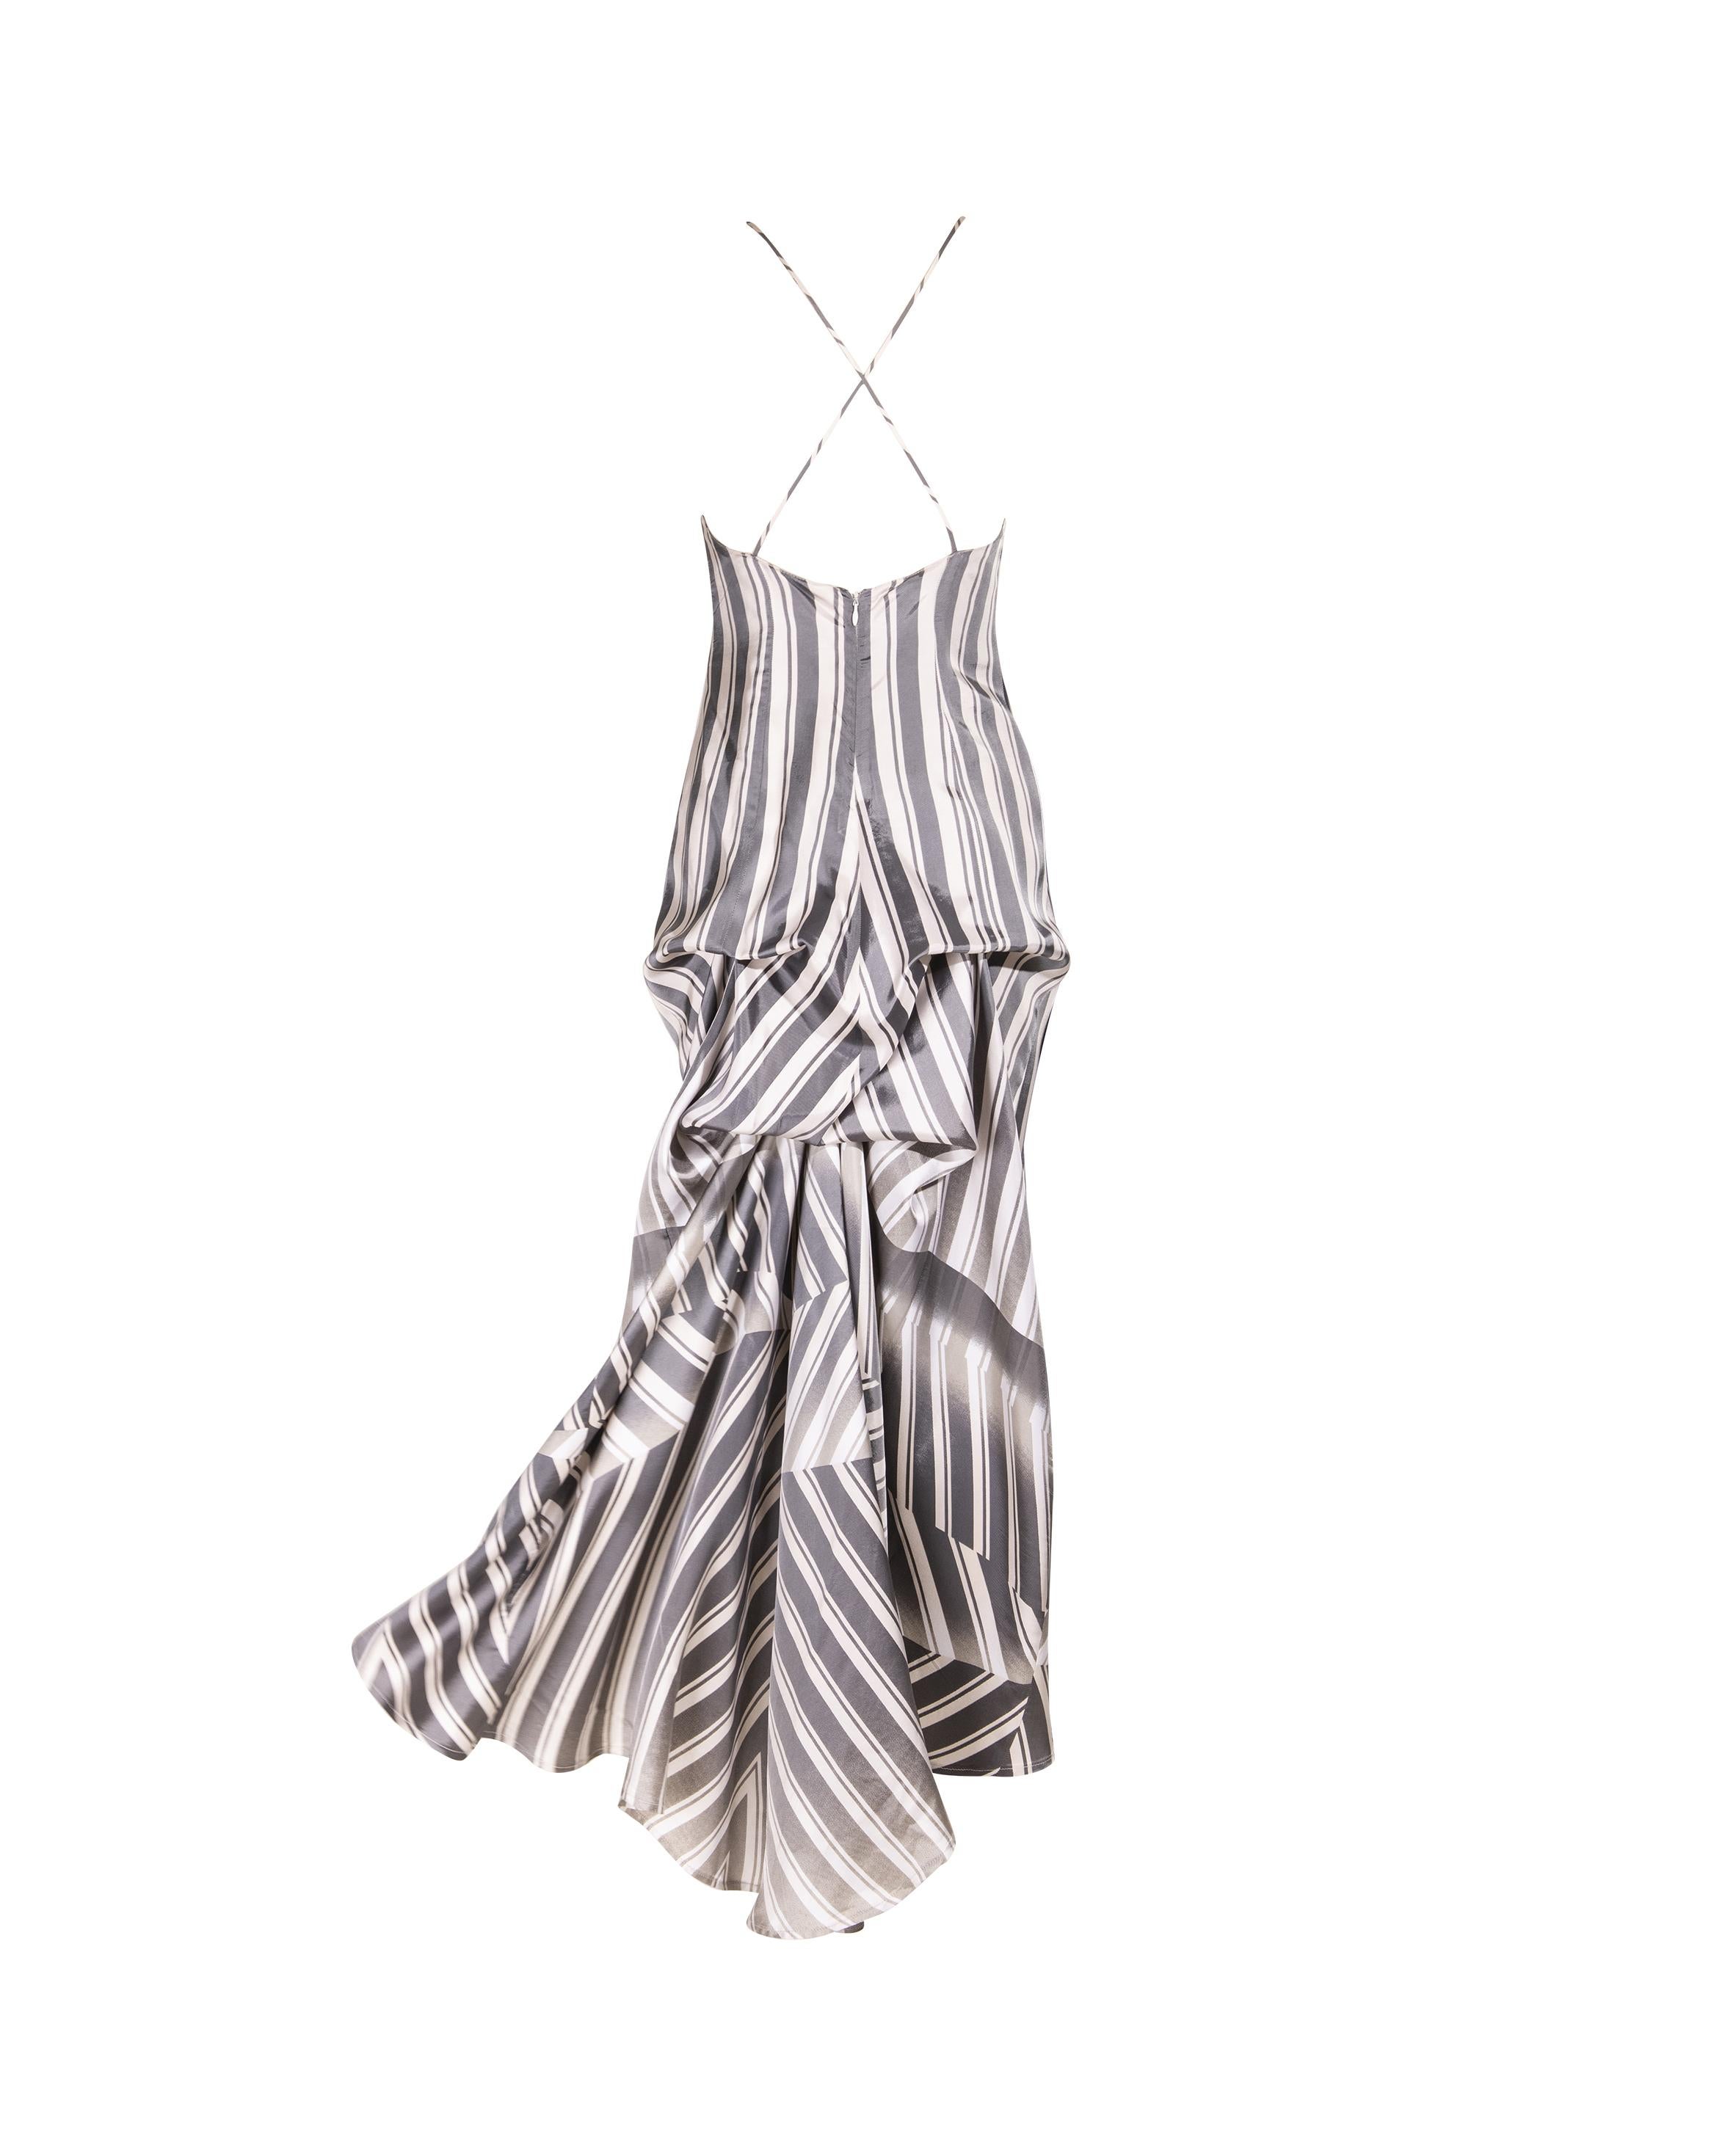 S/S 1999 Dries Van Noten White and Gray Gradient Stripe Bustle Gown For Sale 4